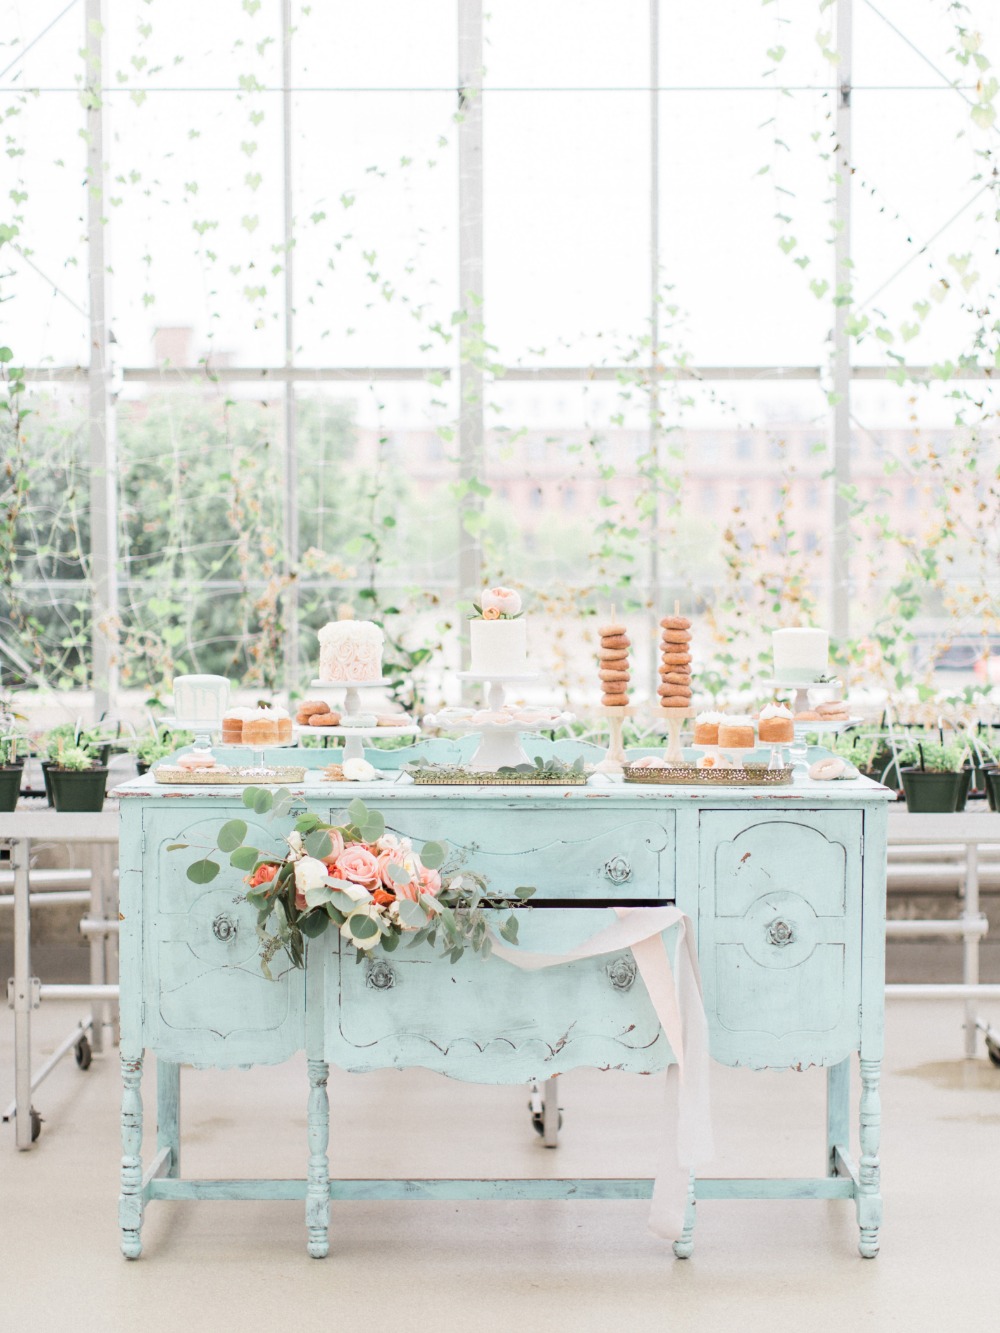 Gorgeous blue vintage inspired cake table